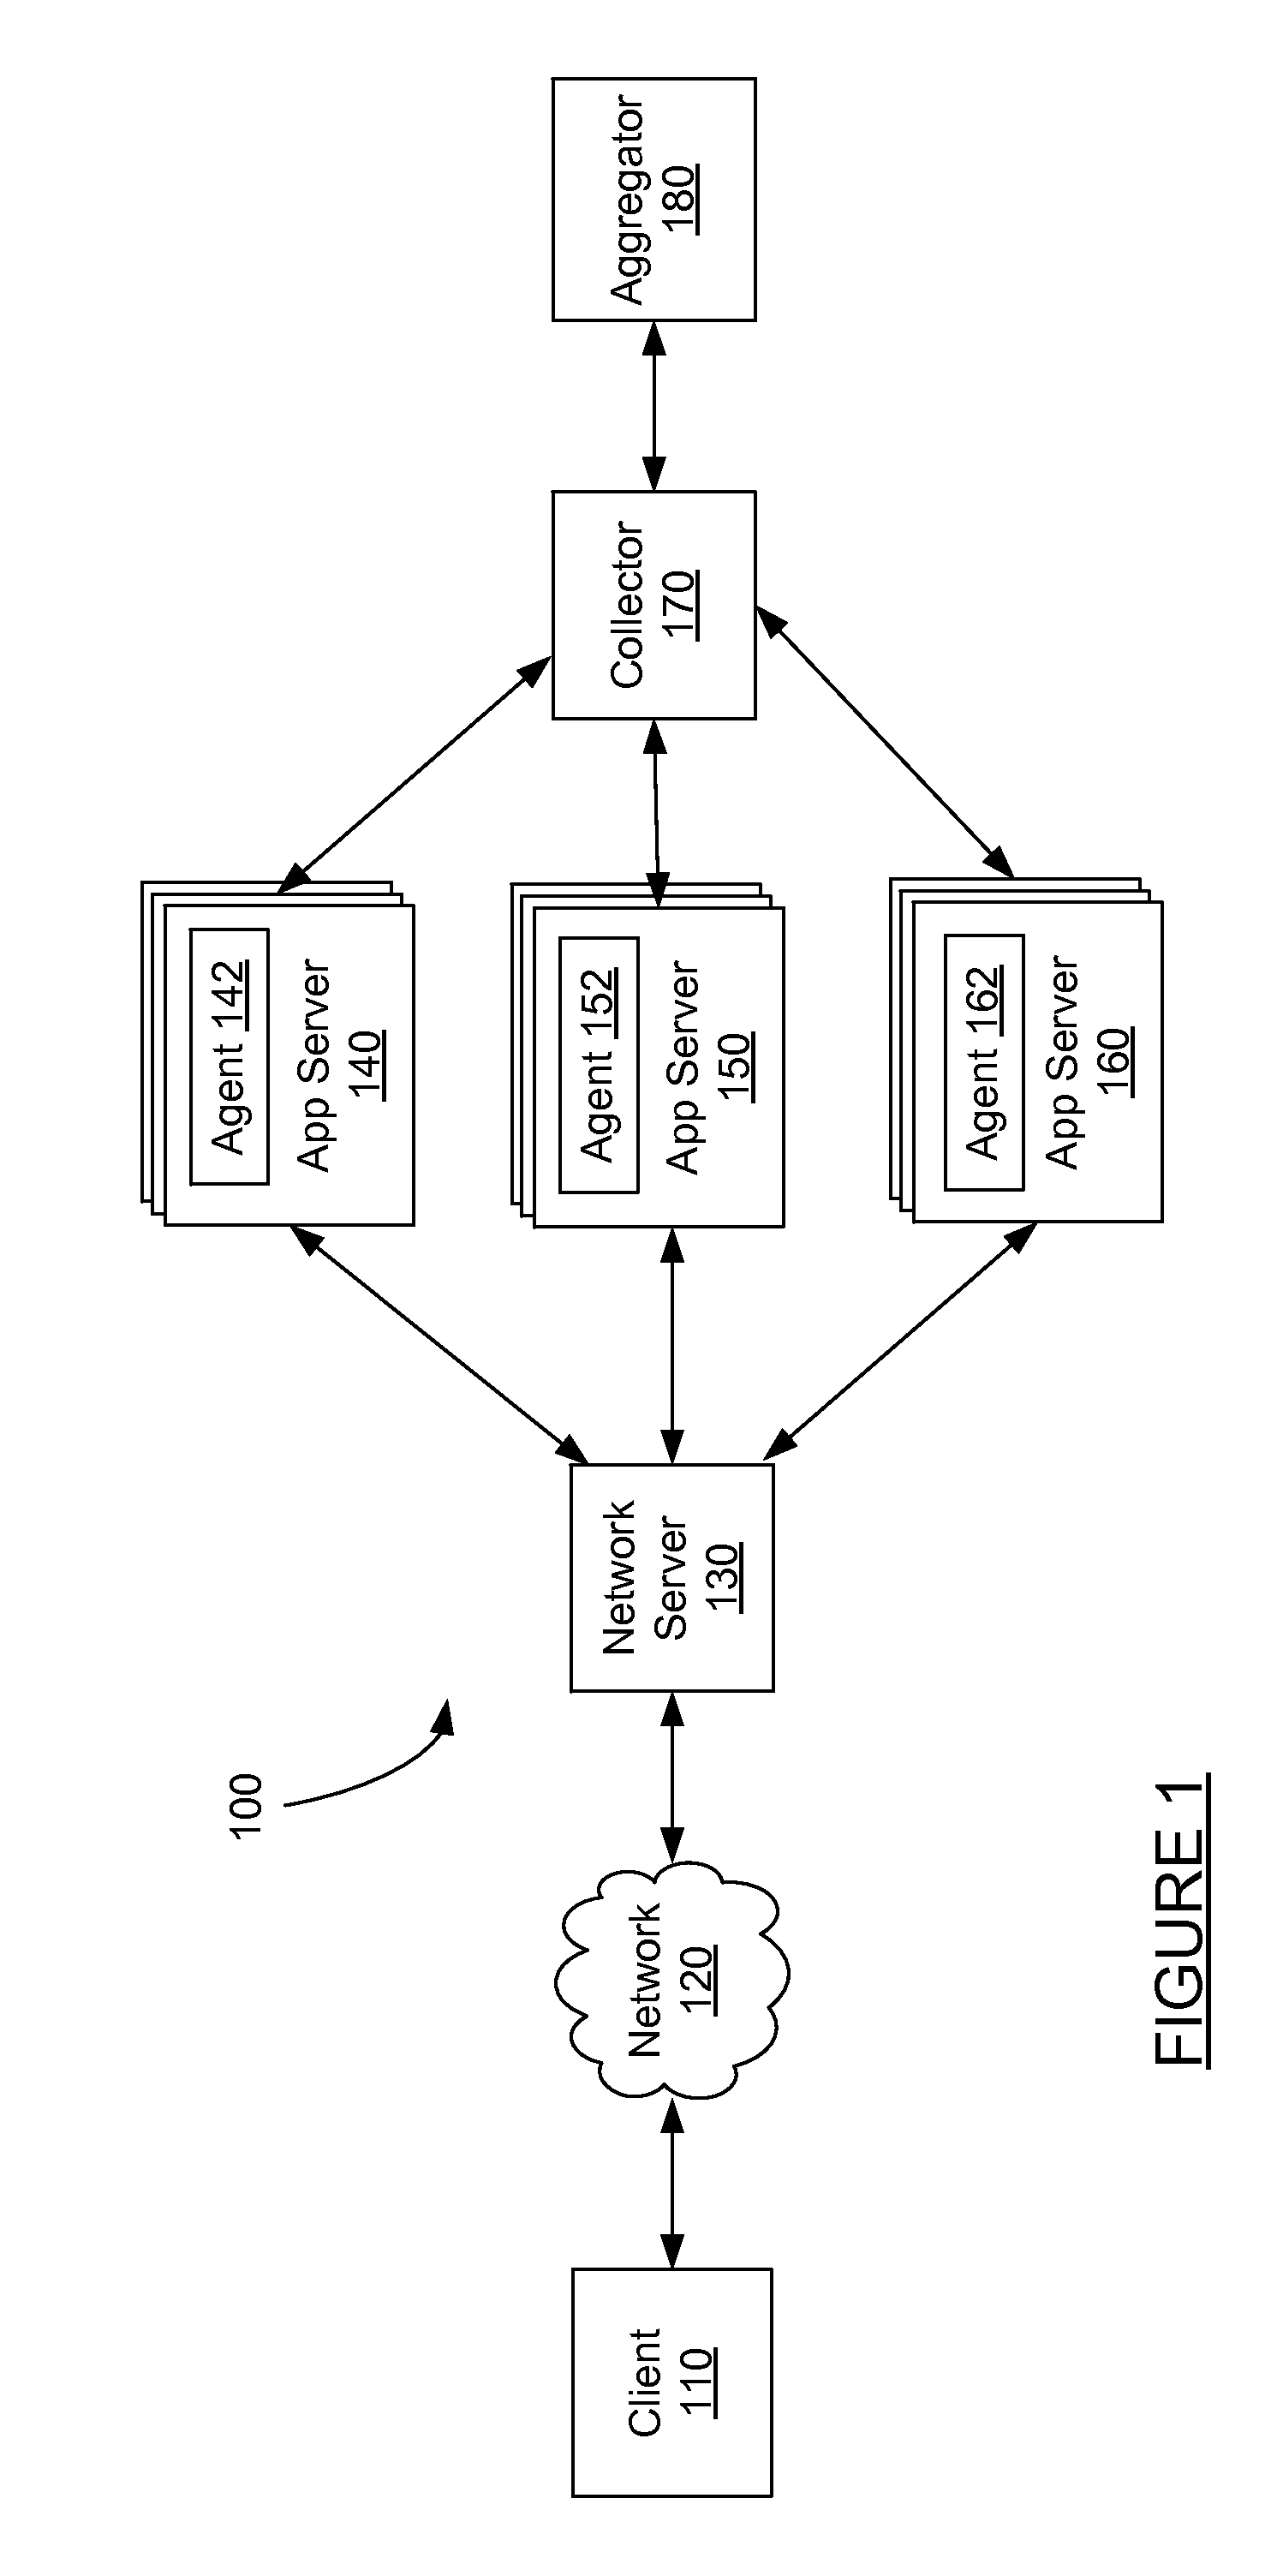 Quorum based distributed anomaly detection and repair